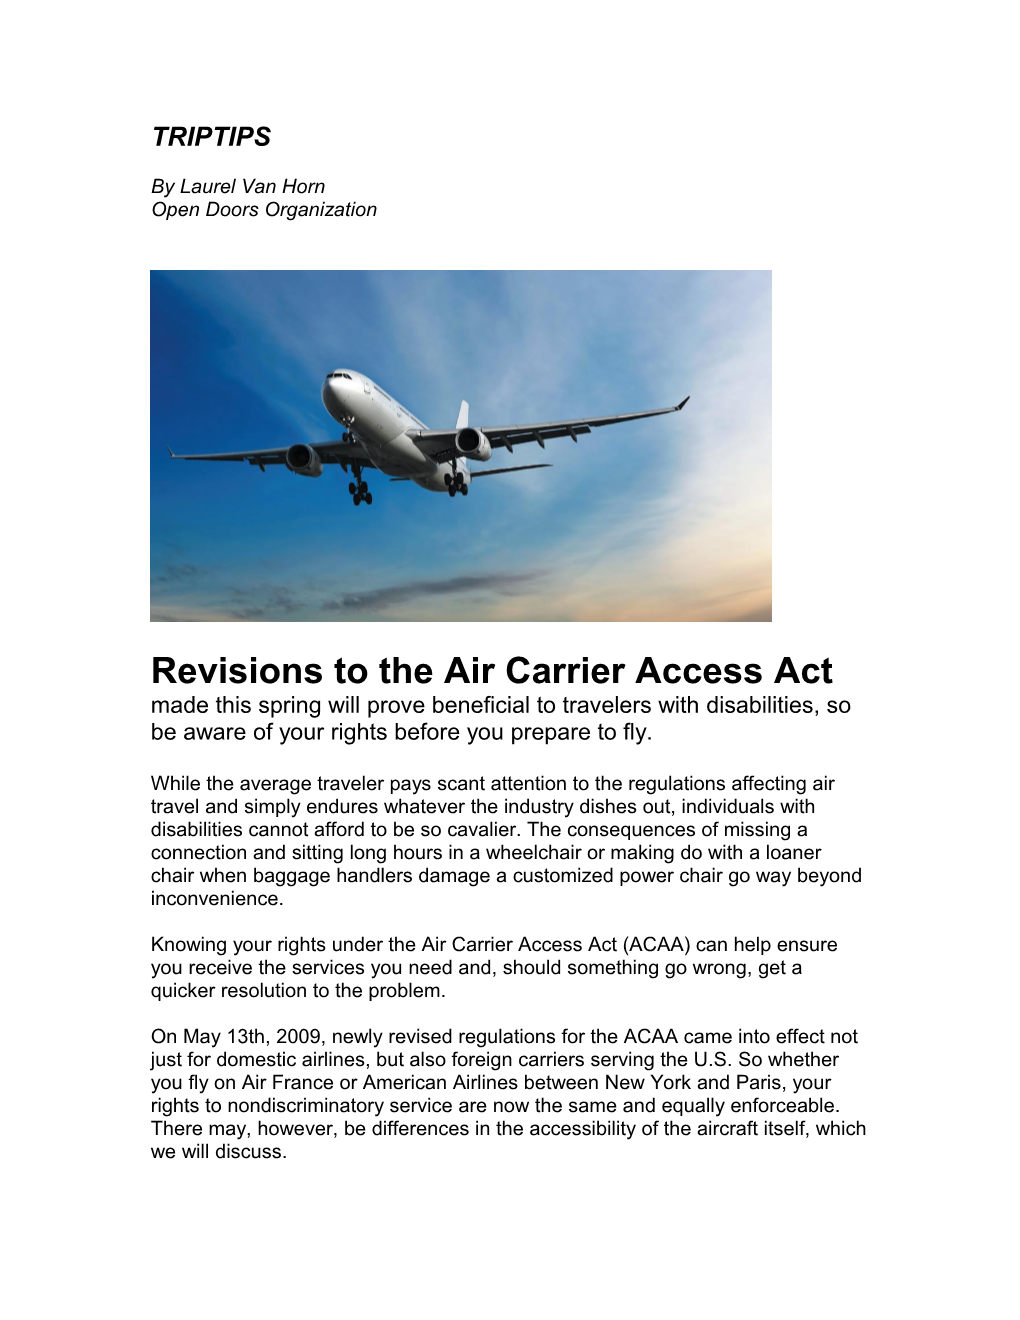 Revisions to the Air Carrier Access Act